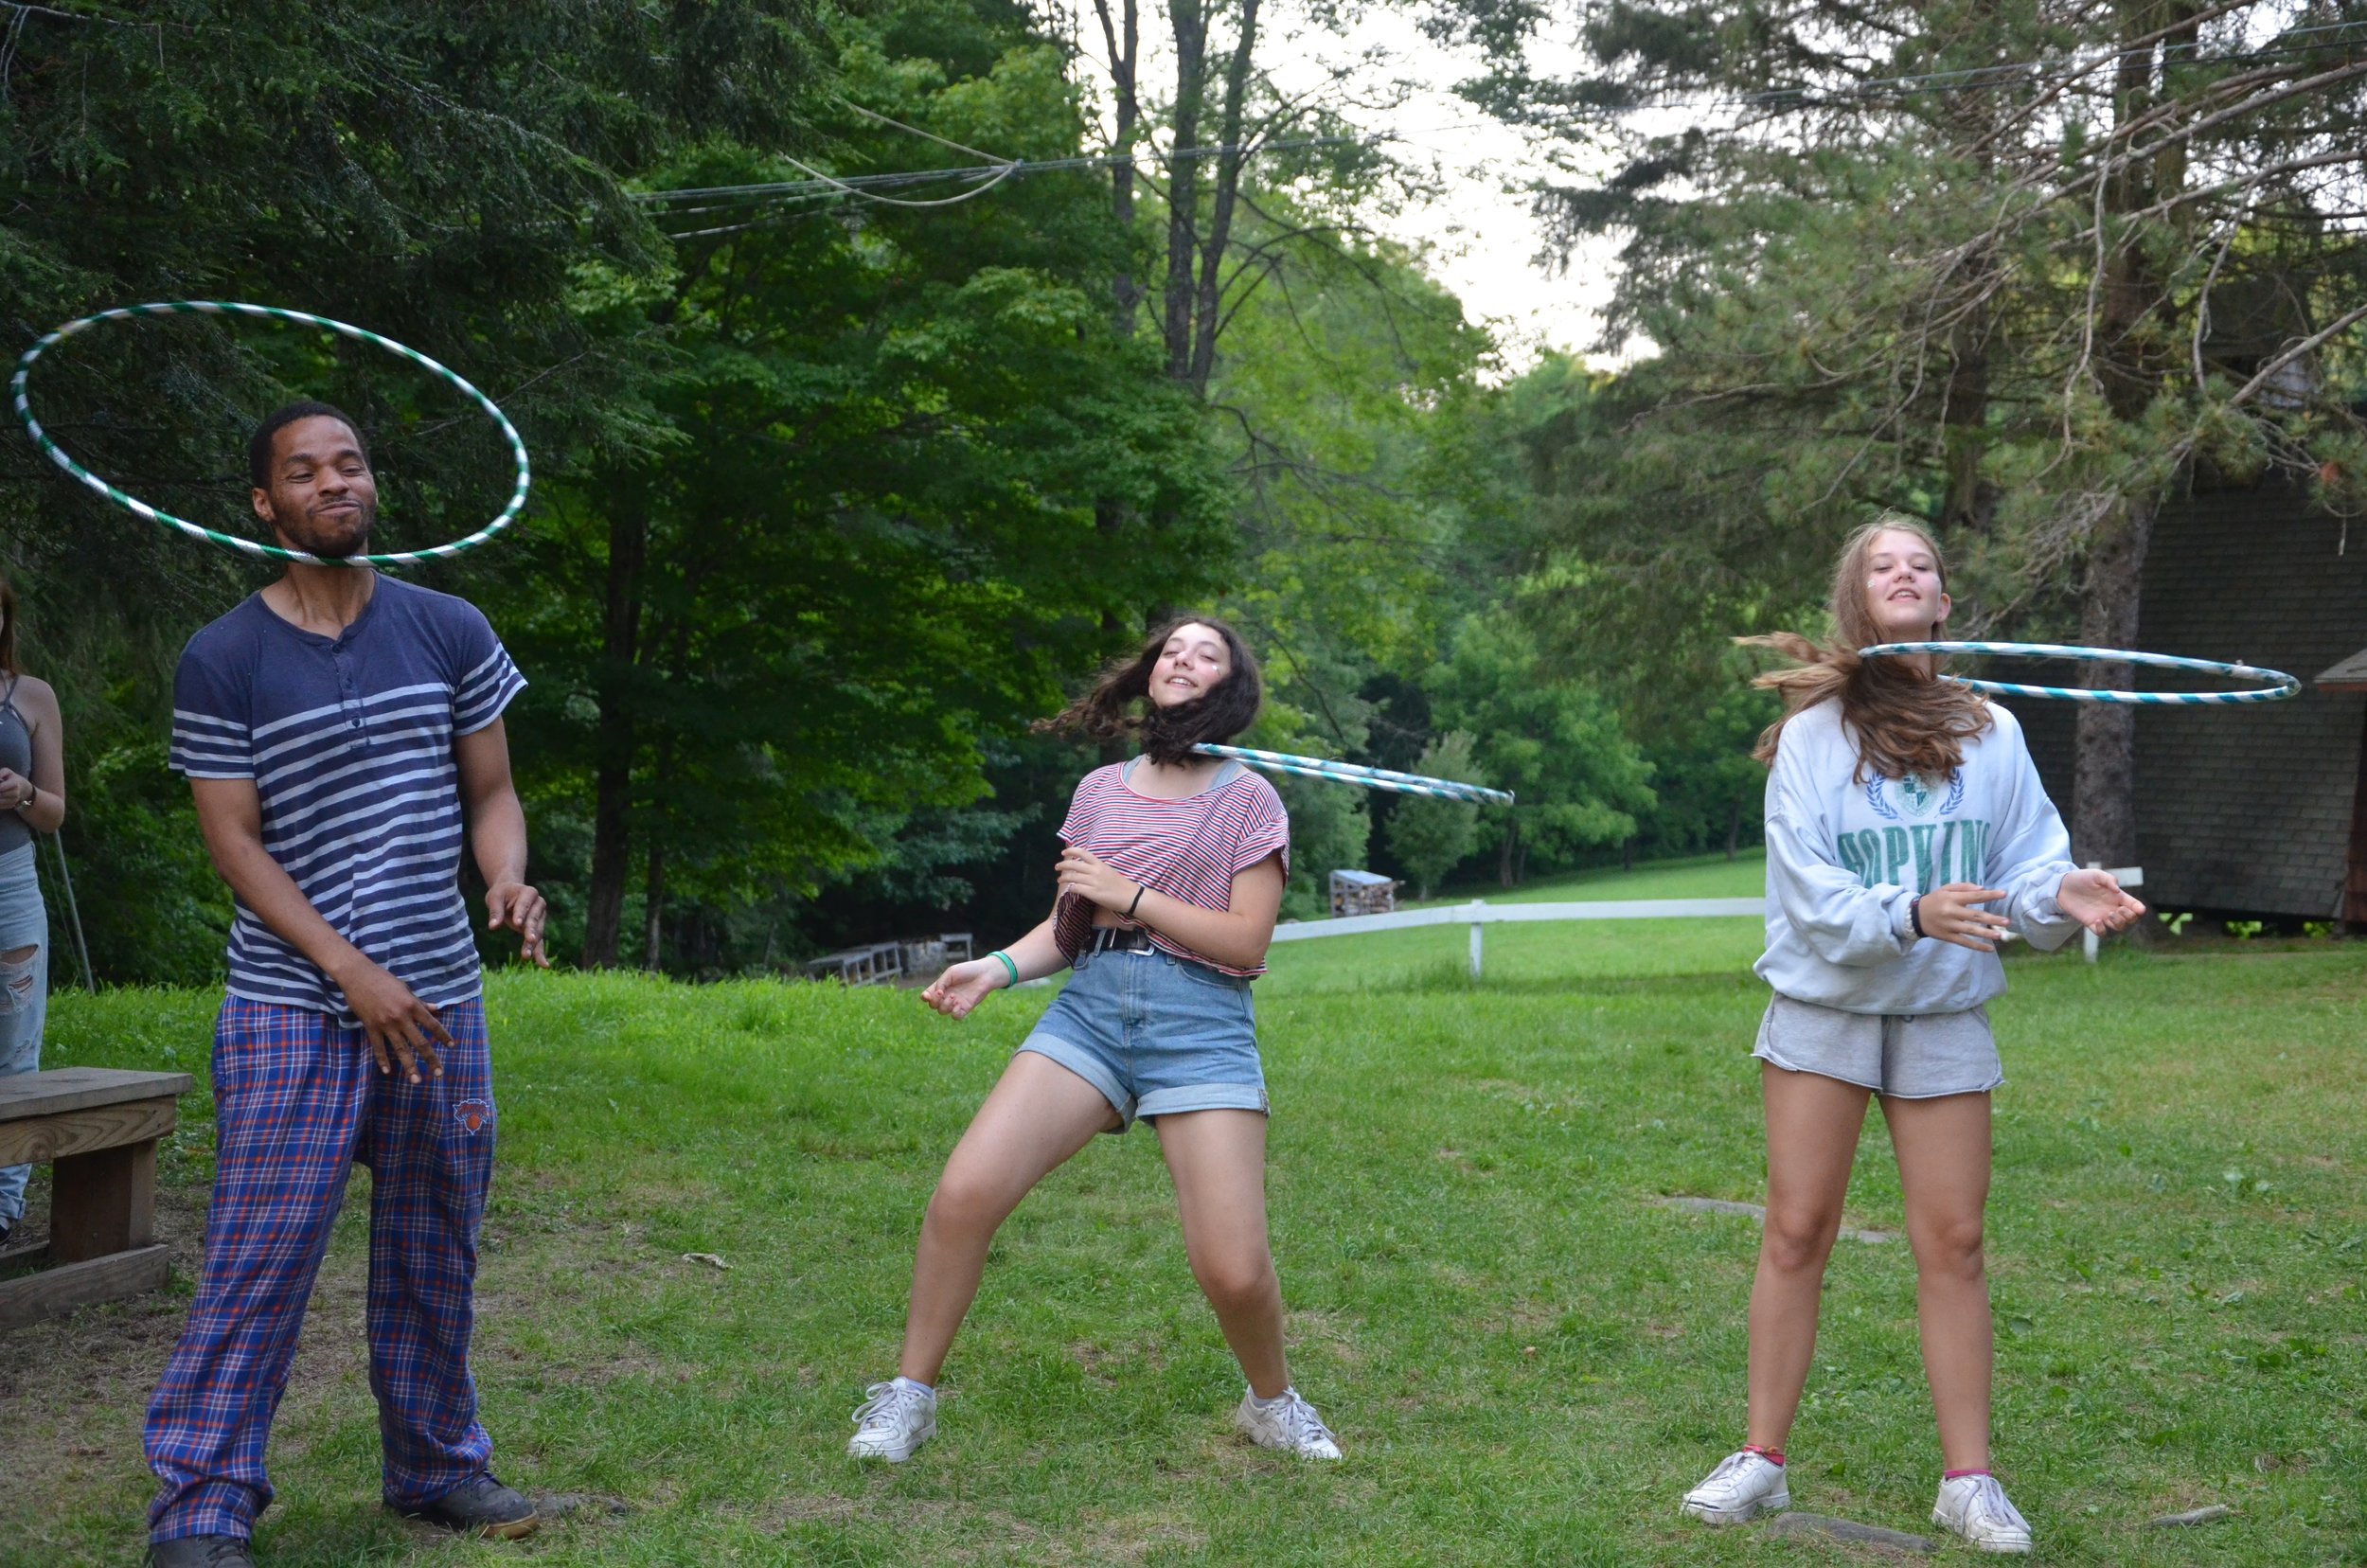 Playing with hoola hoops